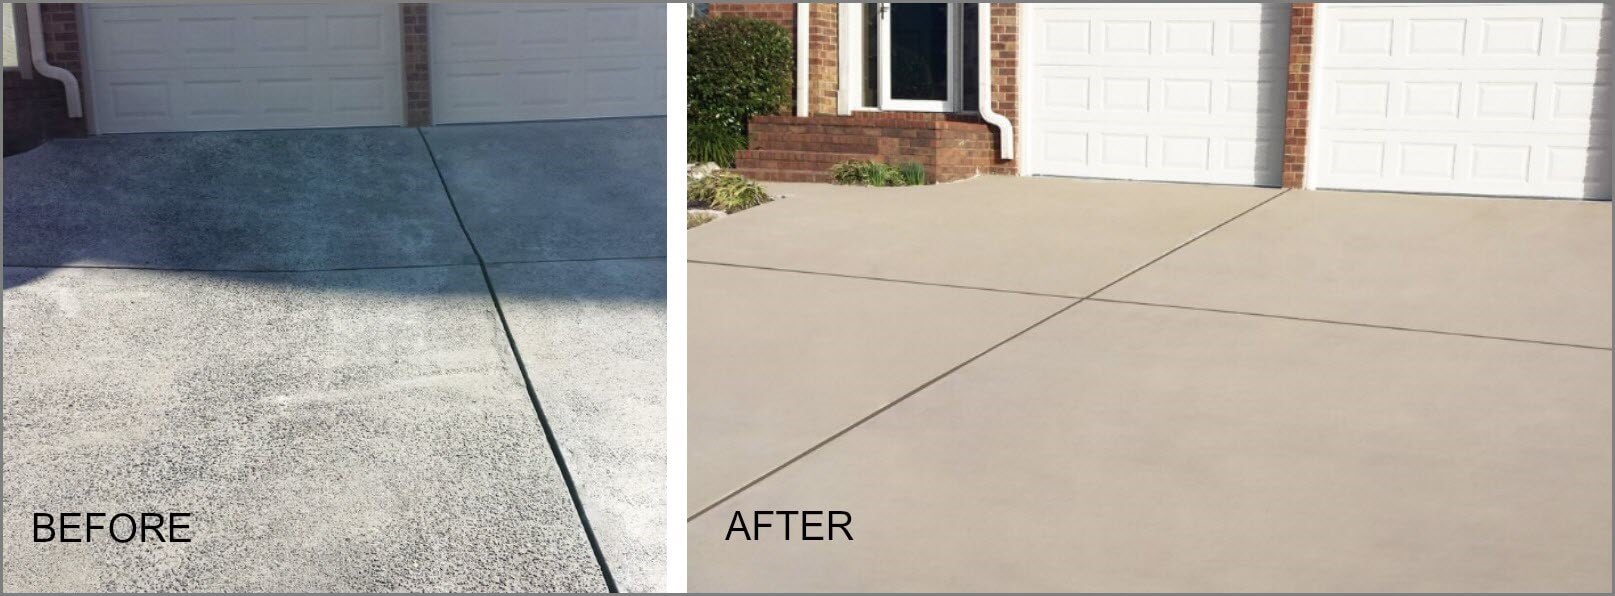 2-before-and-after-concrete-driveway